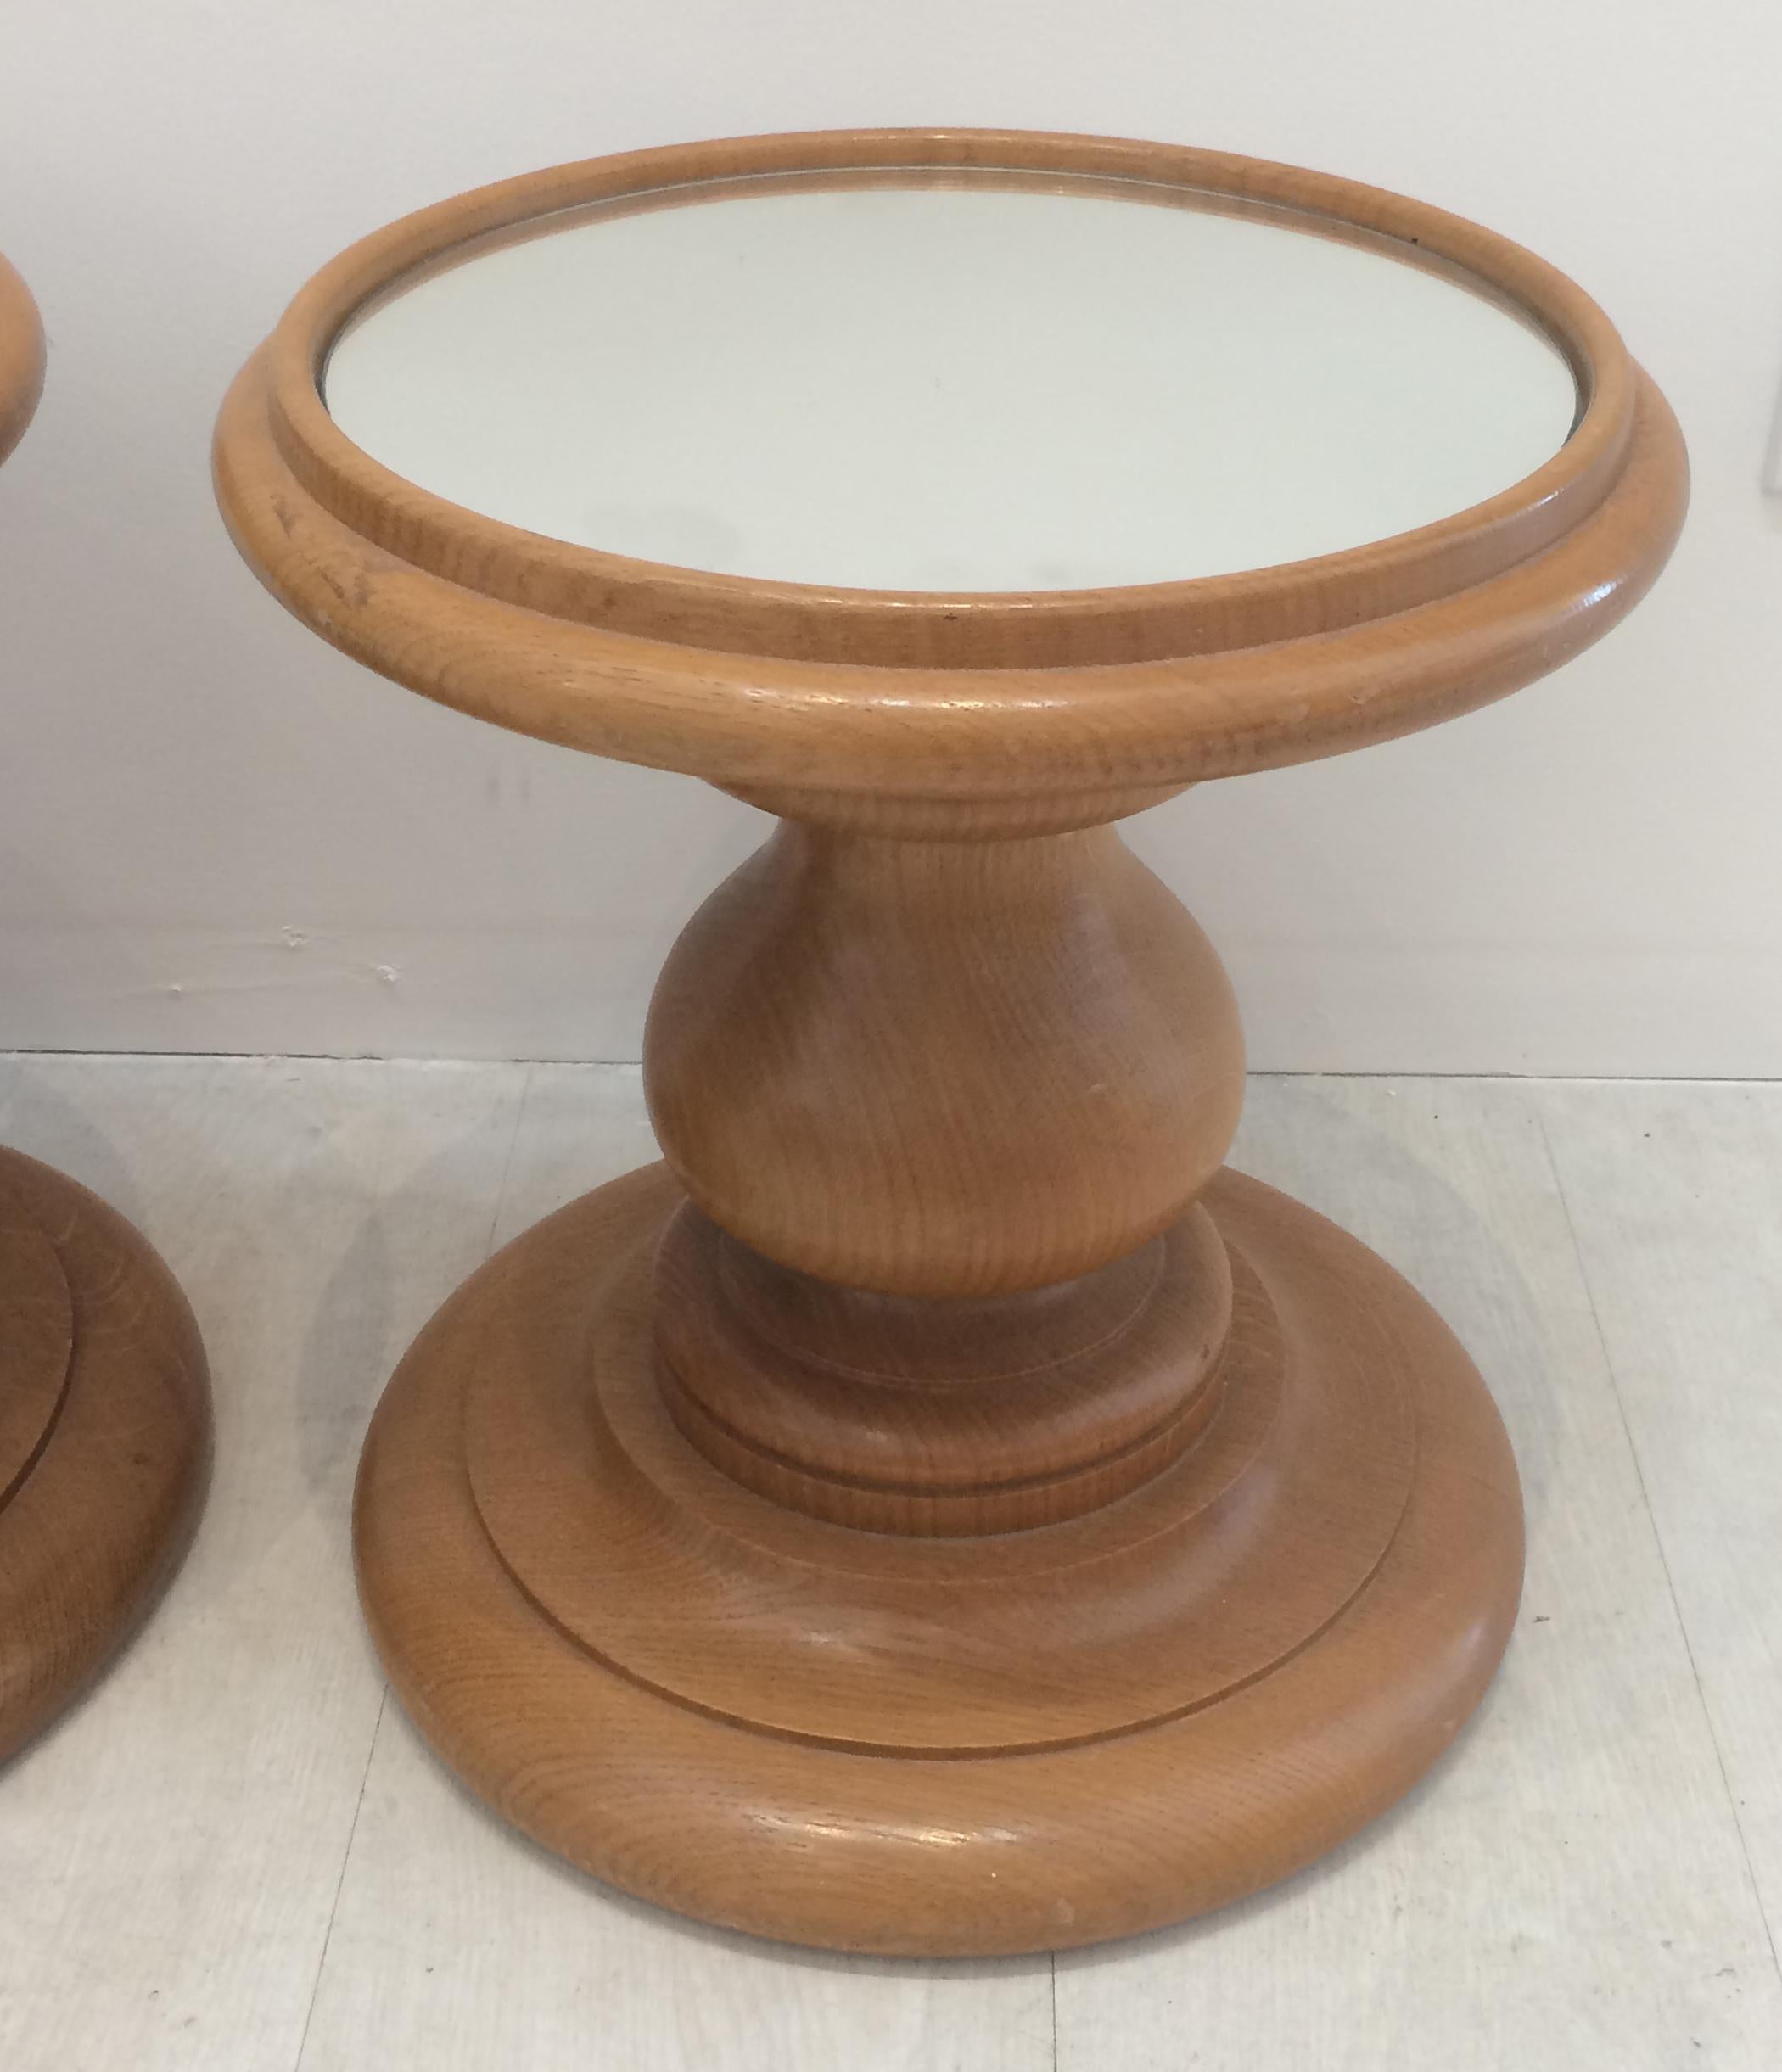 Vintage pair oak circular mirrored top stands in the style of Eames these could have many uses end tables, display pedestals, plant stands. Well proportioned turned oak with some tiger oak showing.